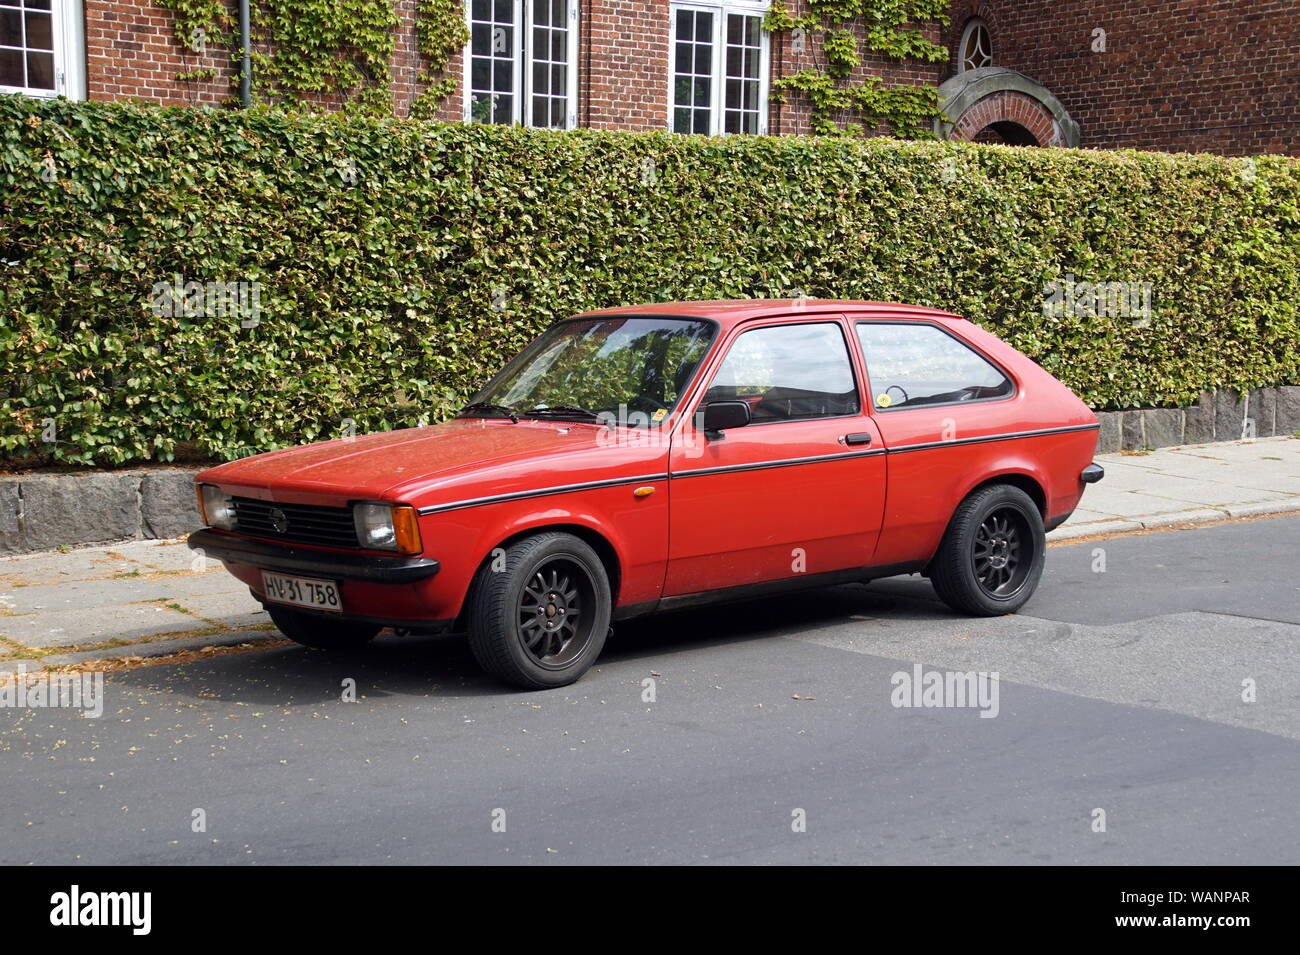 Riskilde, Denmark - July 19, 2019: Opel Kadett C City parked by the side of the road. Nobody in the vehicle. Stock Photo